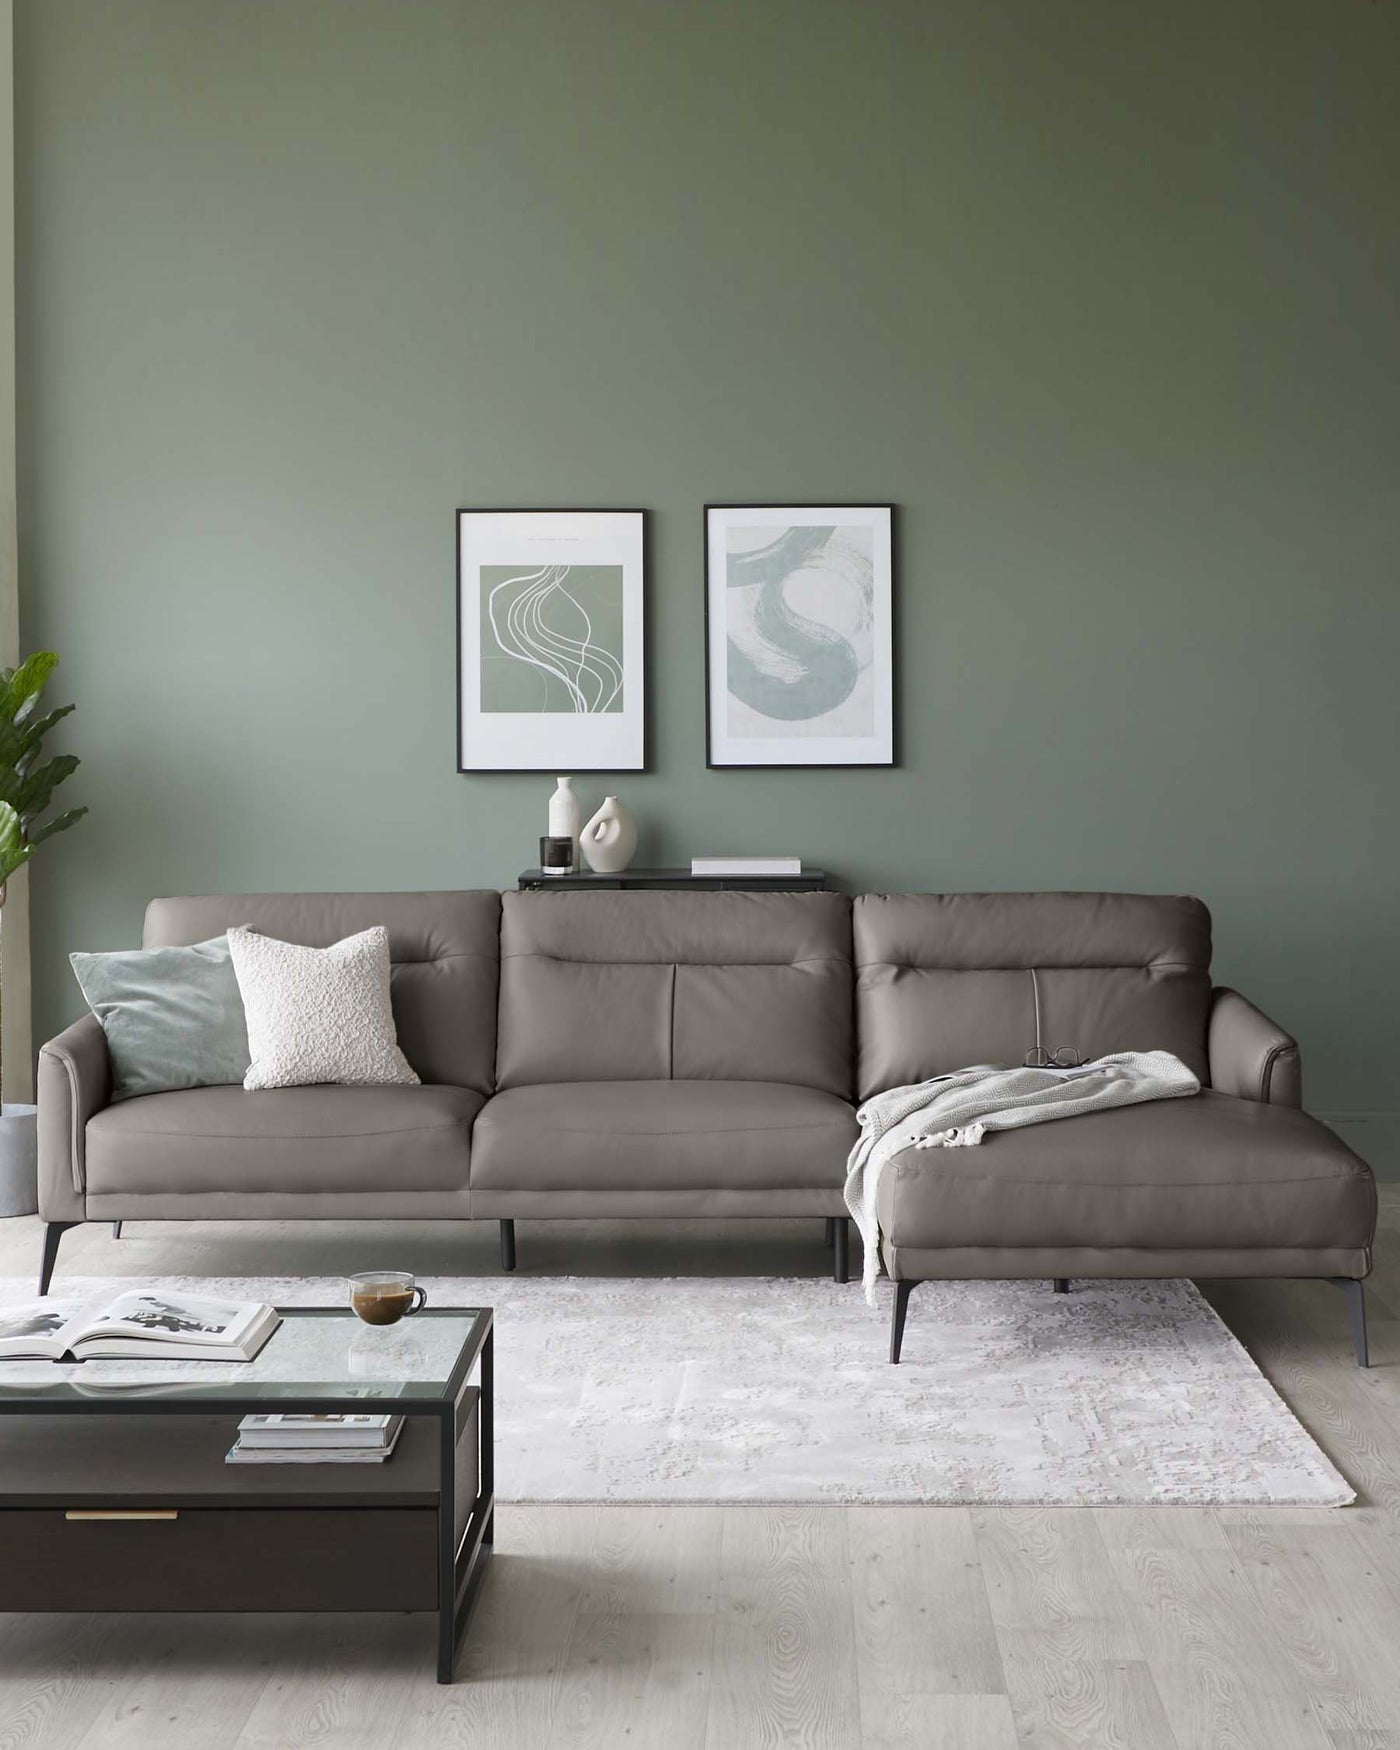 Modern L-shaped grey upholstered sectional sofa with multiple cushions, accompanied by a rectangular black metal coffee table with a glass top on a textured white area rug.